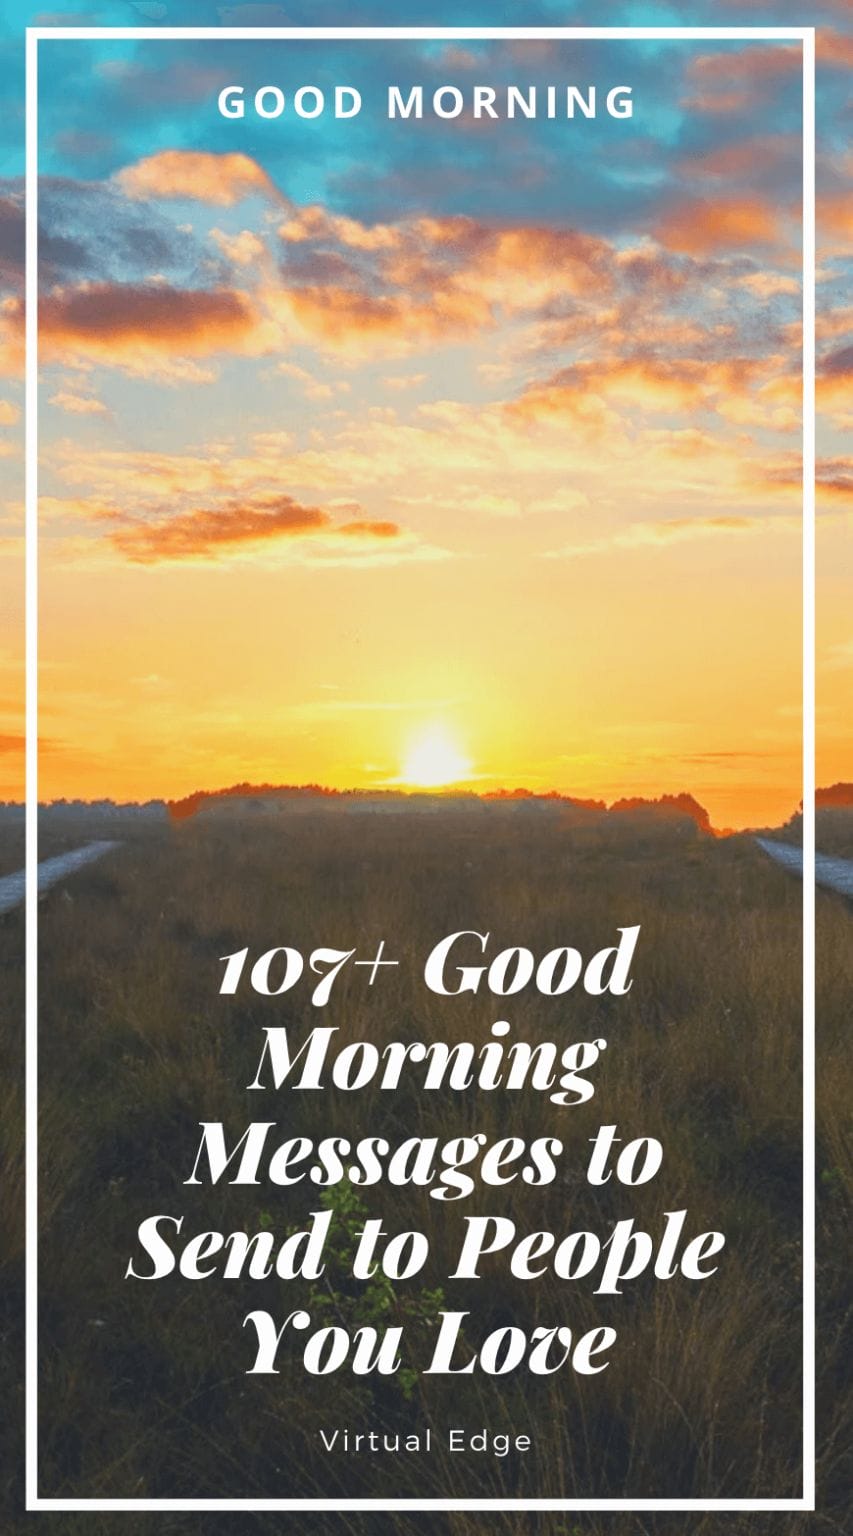 110 Good Morning Messages to Send to People You Love | Virtual Edge